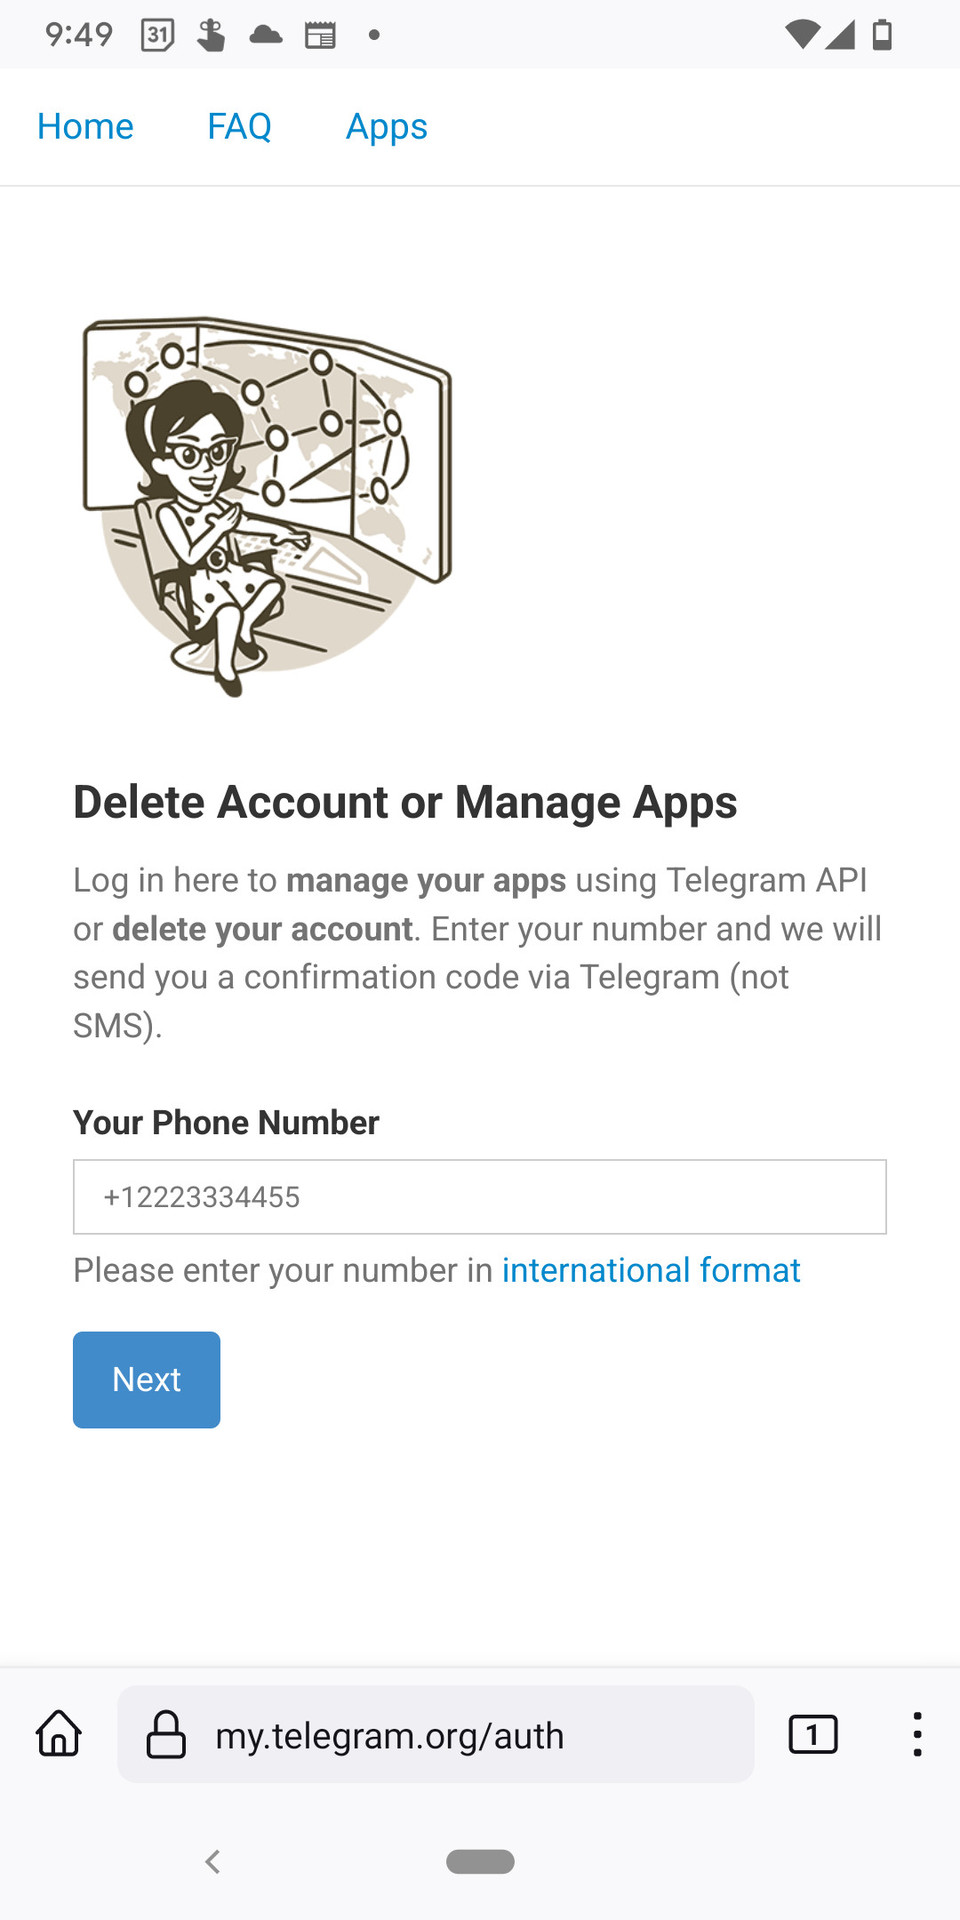 The Telegram web portal auth page. It reads "Delete Account or Manage Apps" and there is a field to enter a phone number under which is a blue 'Next' button.